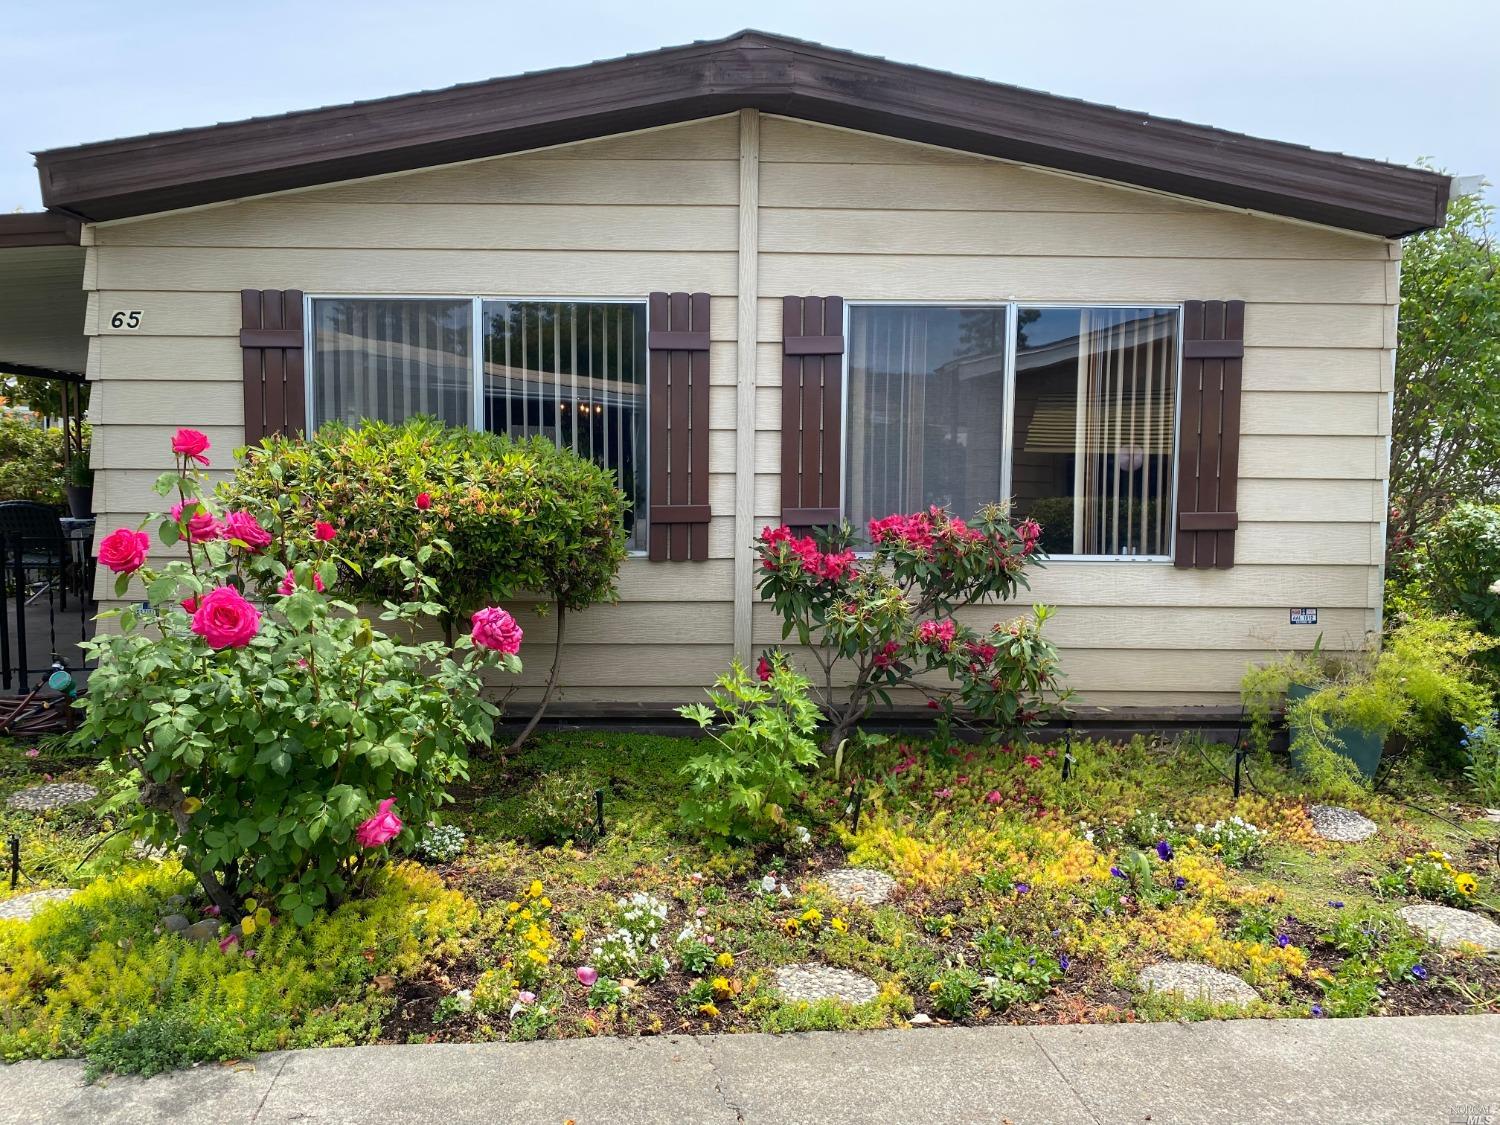 a flower garden is sitting in front of a house